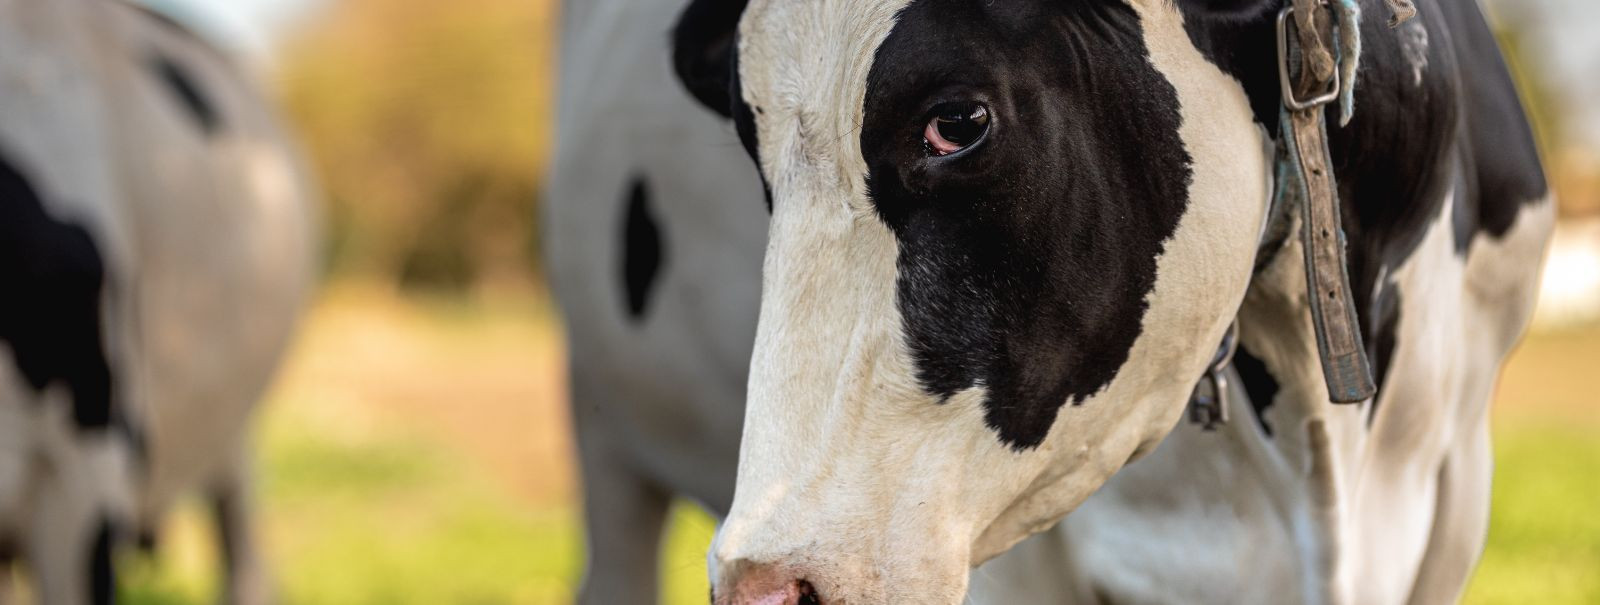 For dairy farmers, the goal is clear: maximize milk yield without compromising the health of the herd. Nutrition plays a pivotal role in achieving this balance.